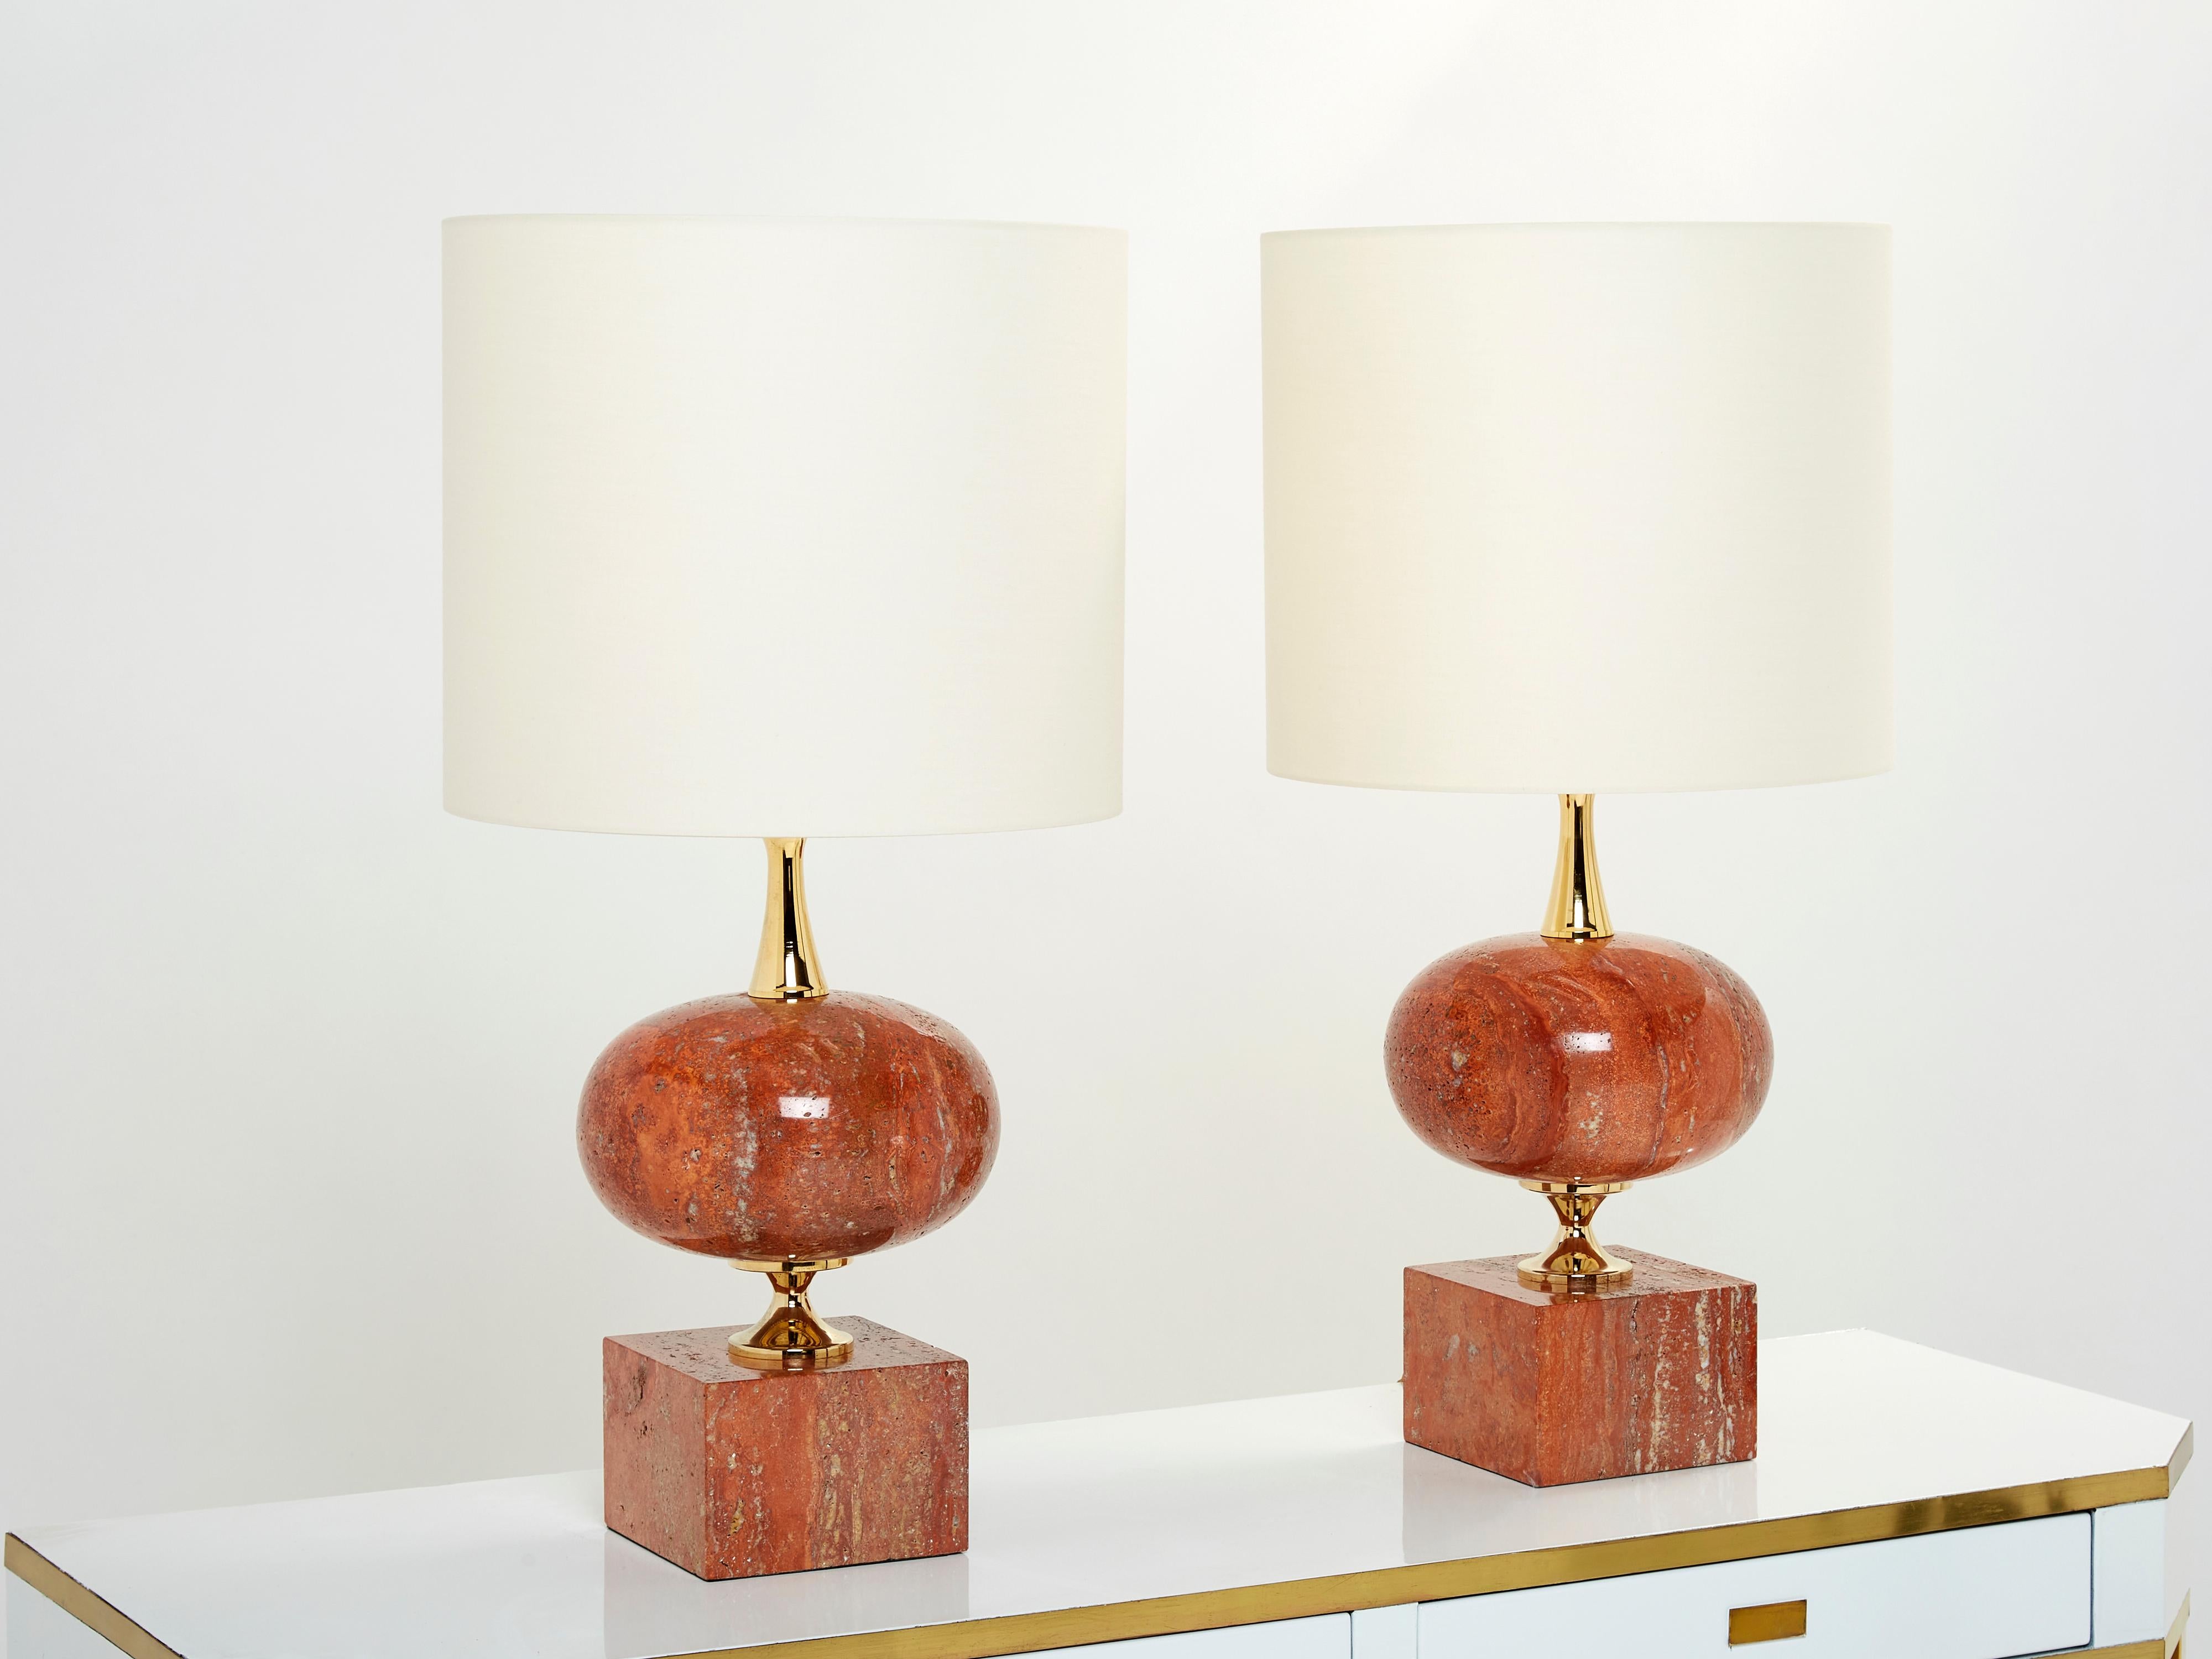 This large pair of lamps was designed by French lighting artist Philippe Barbier in the 1970s. Made out of rich red Italian travertine stone, with brass fixtures, these lamps are typical of Barbier’s designs. Glossy red travertine brings all the